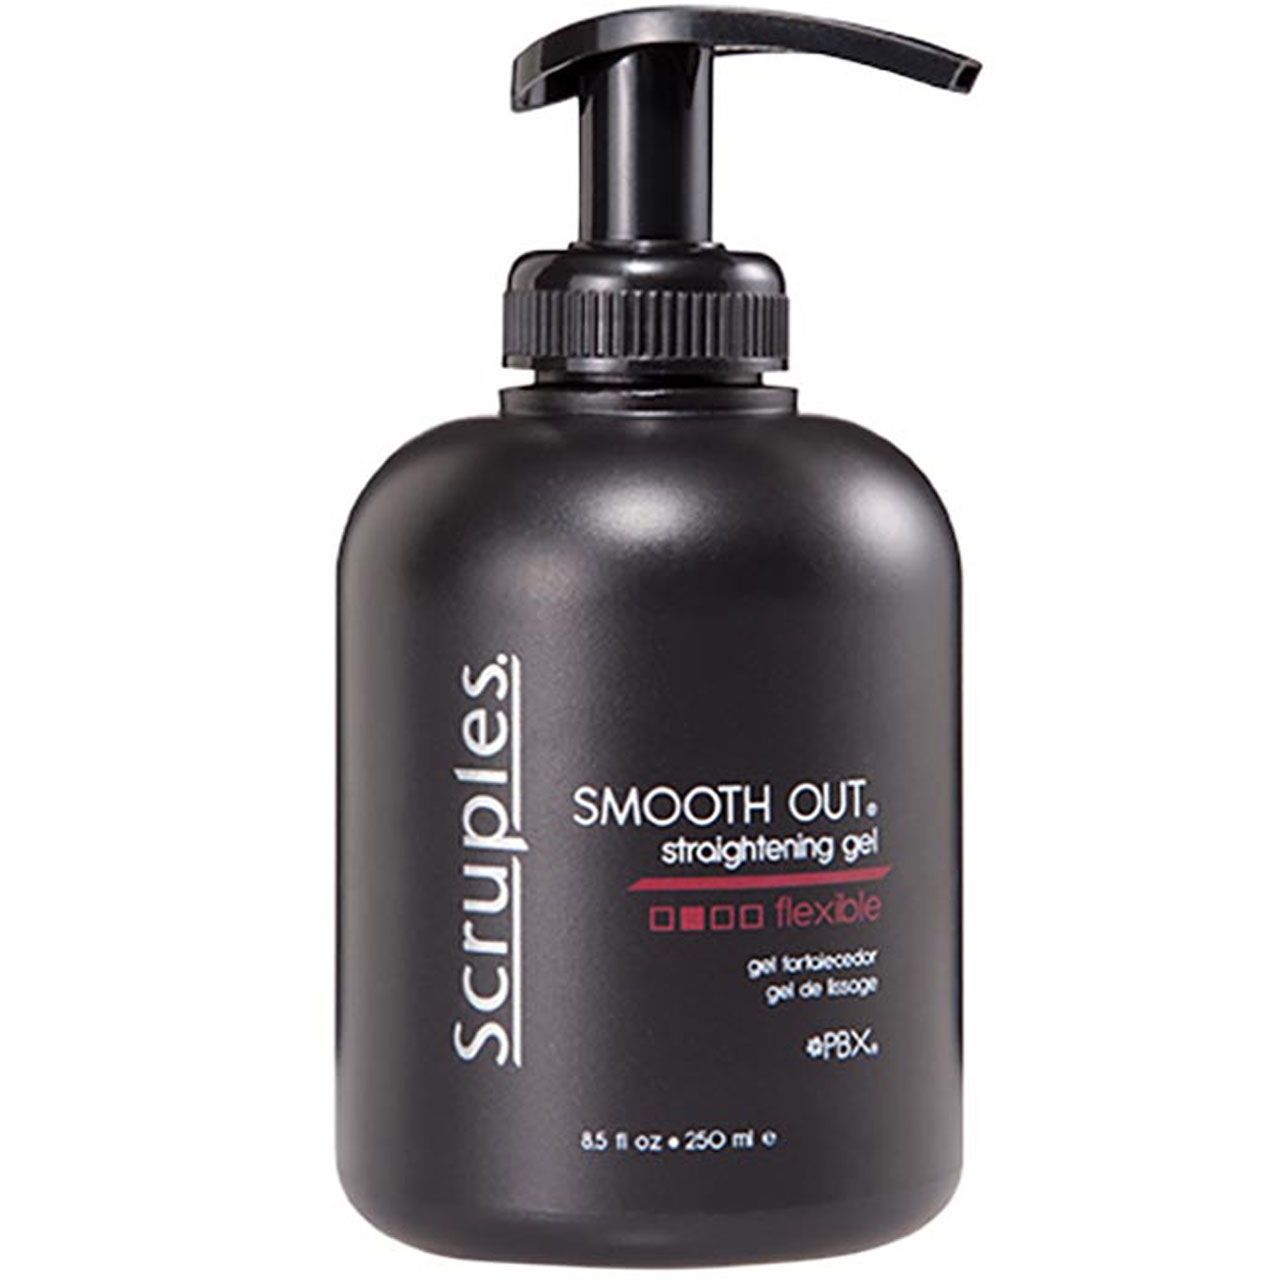 Smoothing gel. Glaze для волос. Smoothing out. Smooth. Smooth and straighten.